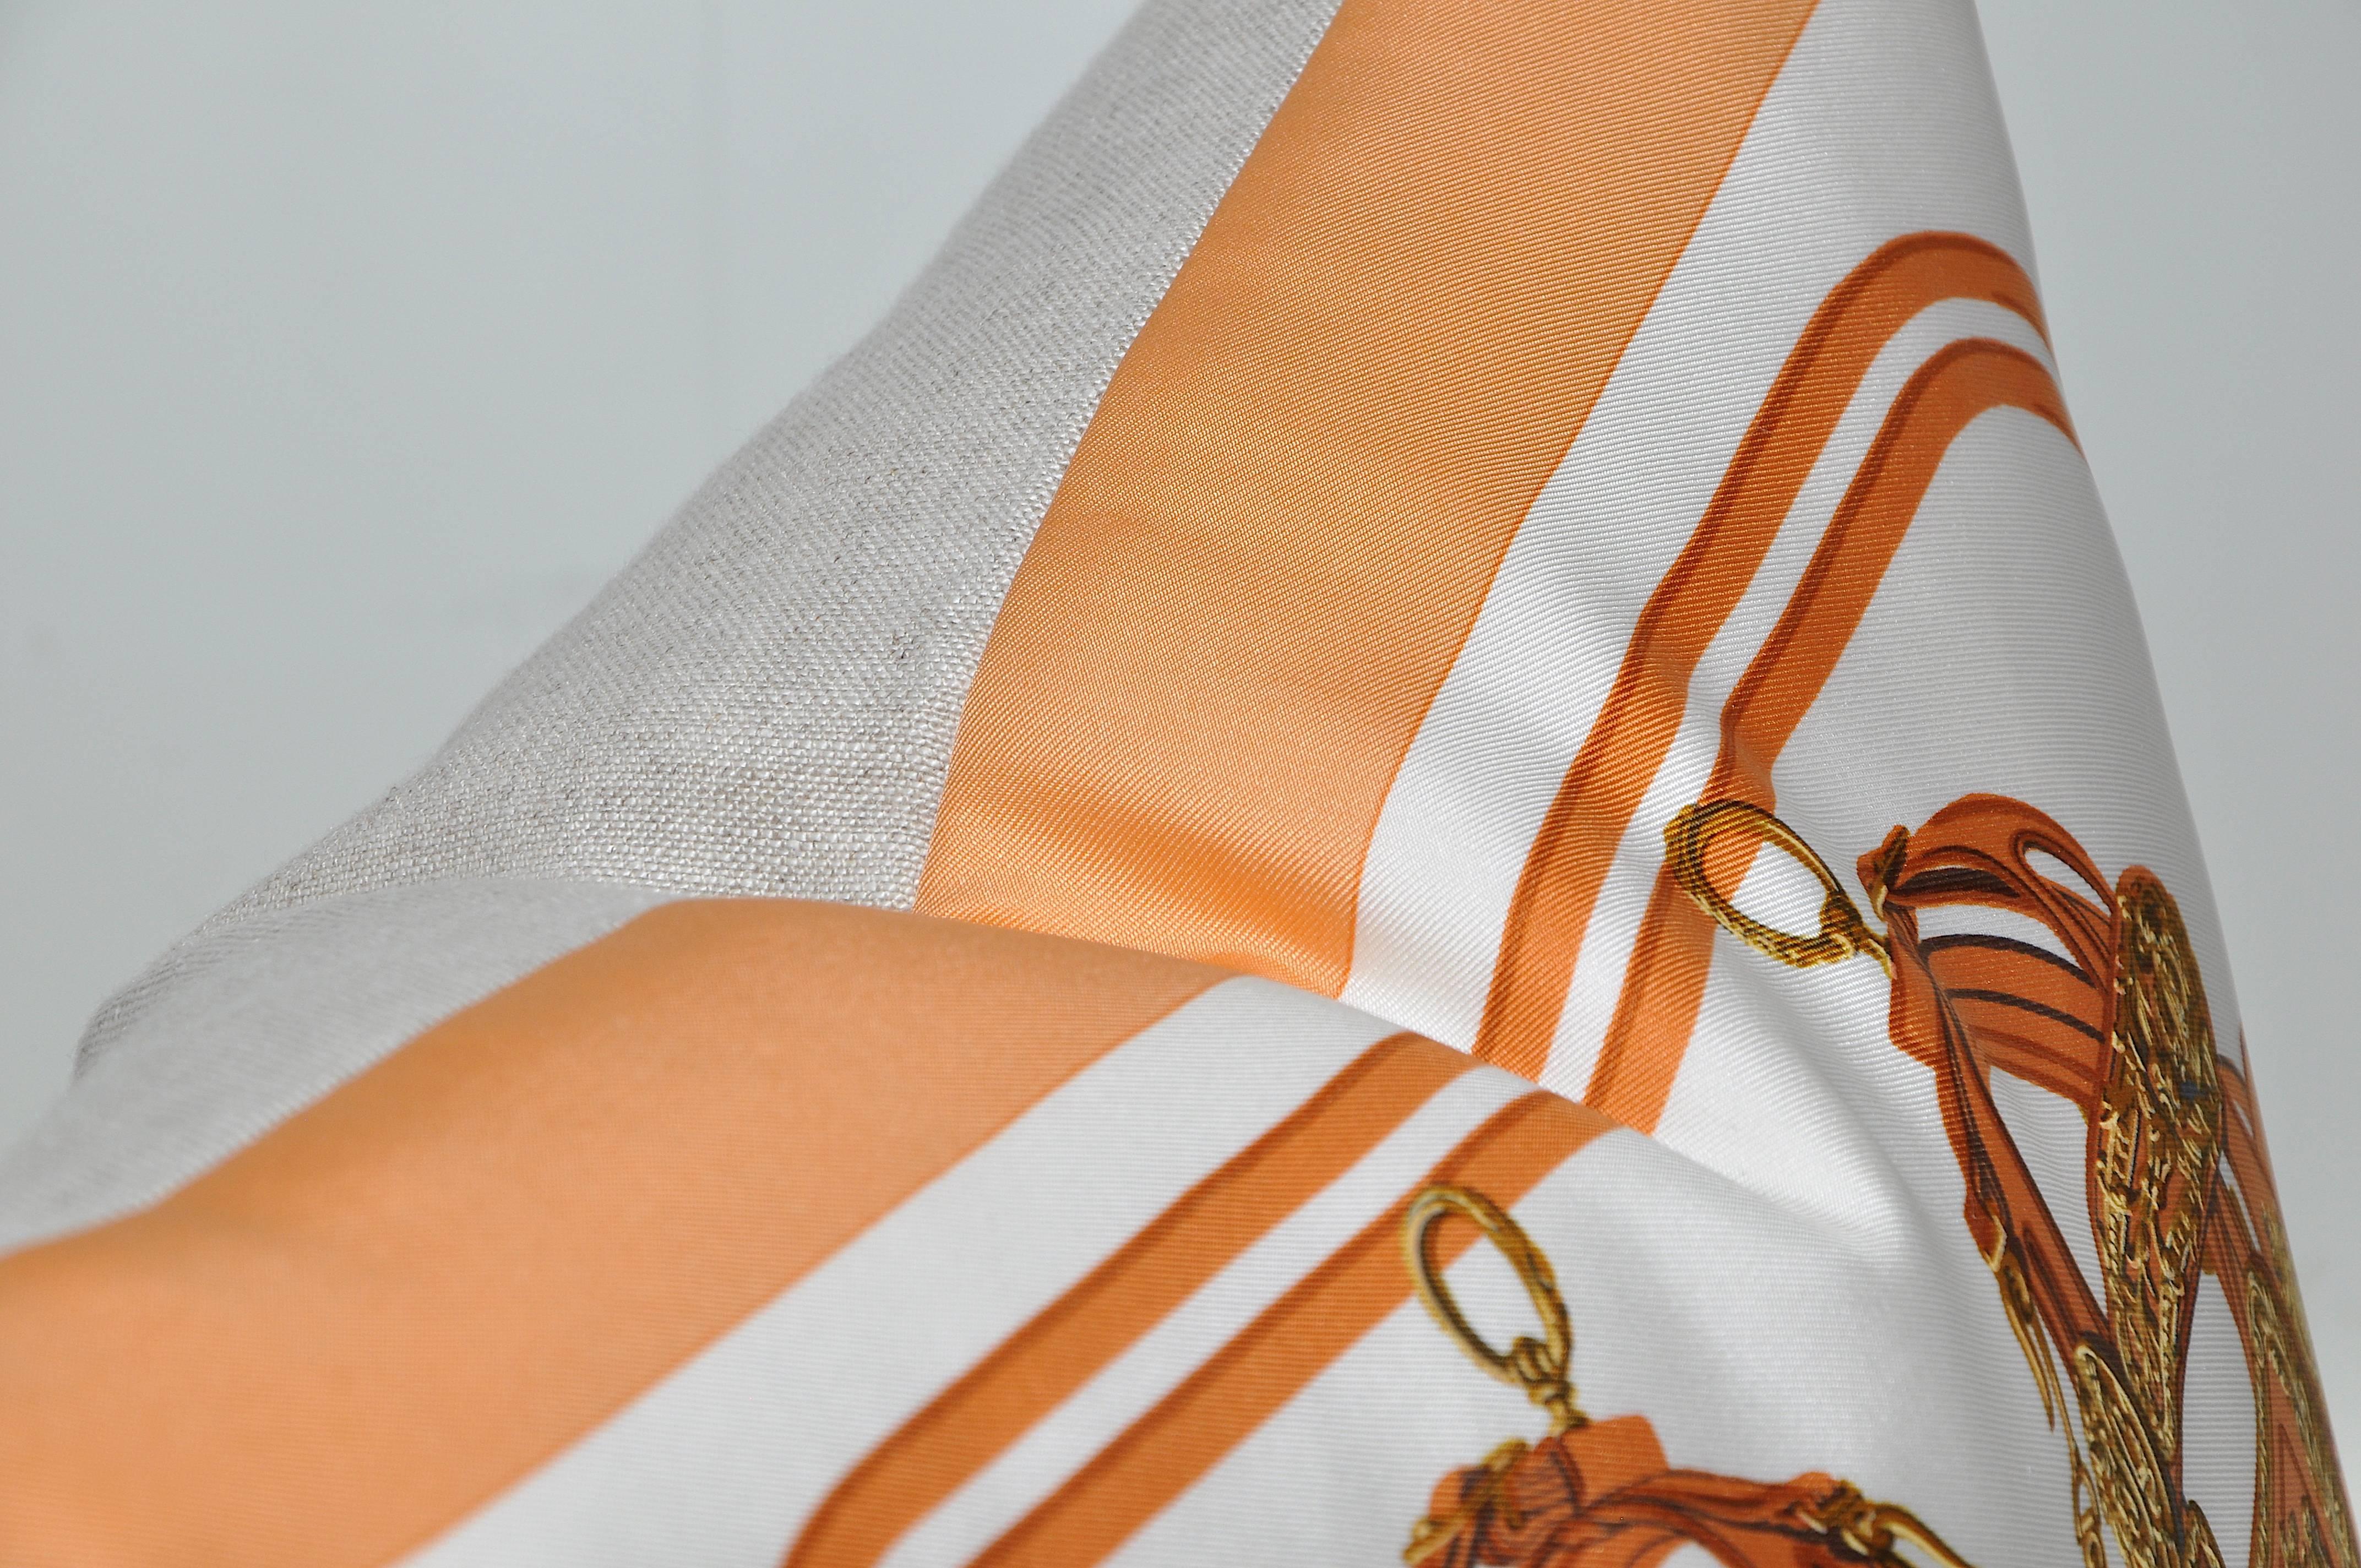 Hand-Crafted Vintage Hermes Orange Equestrian Silk Scarf with Irish Linen Cushion Pillow